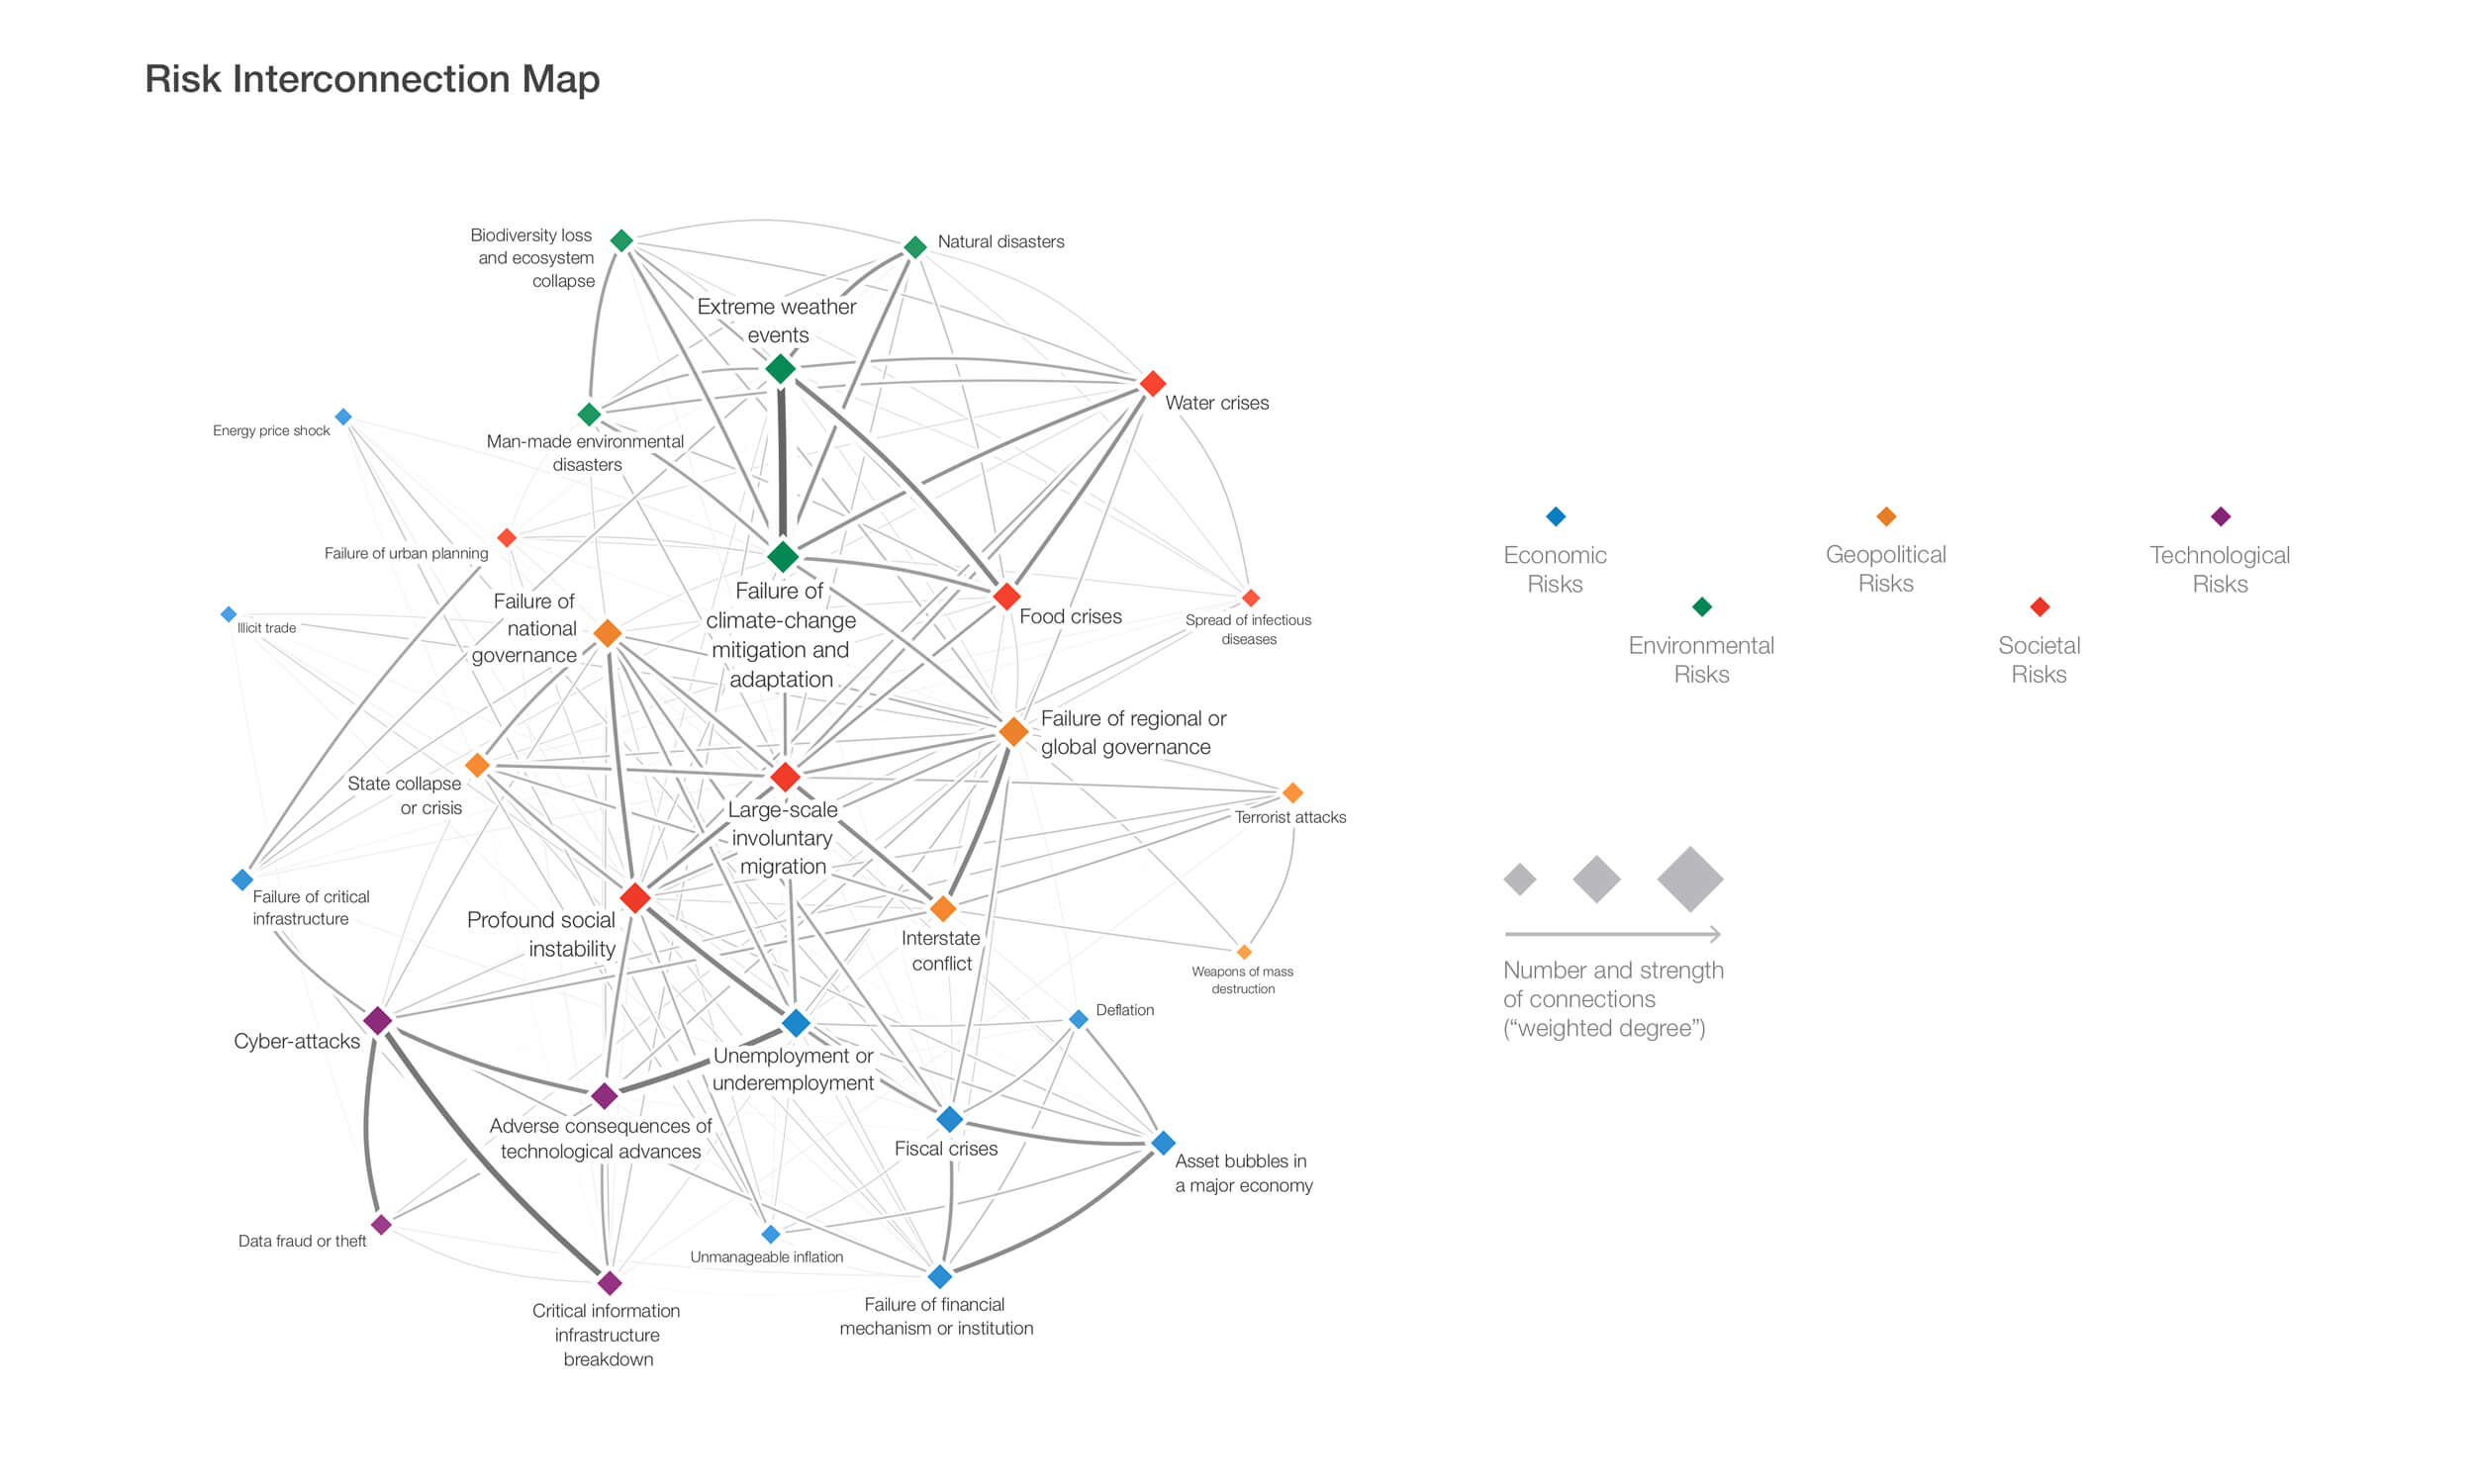 risk interconnections map 2019